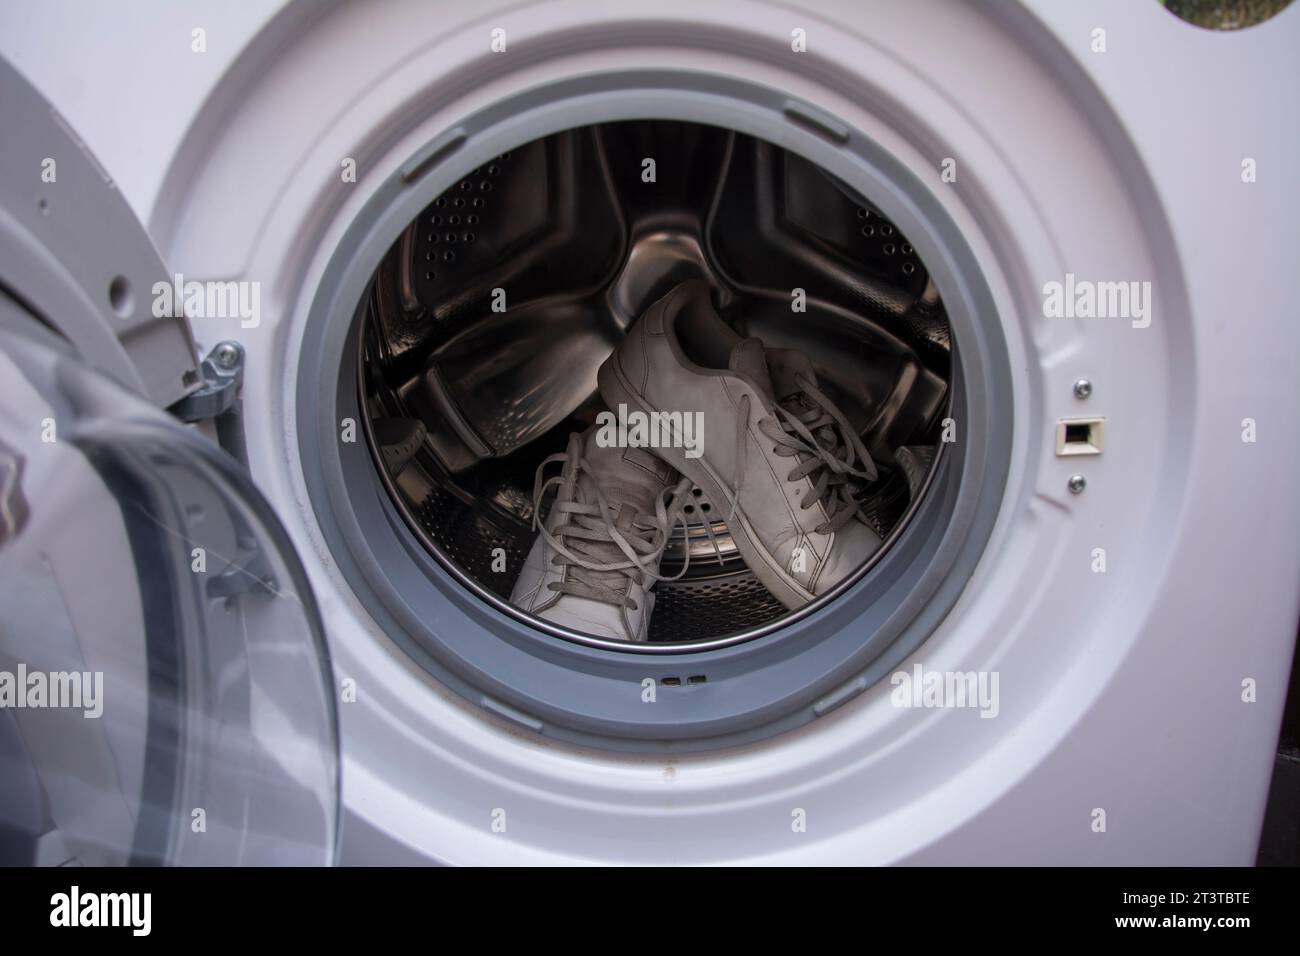 Dirty old sneakers waiting to be washed in the washing machine Stock Photo